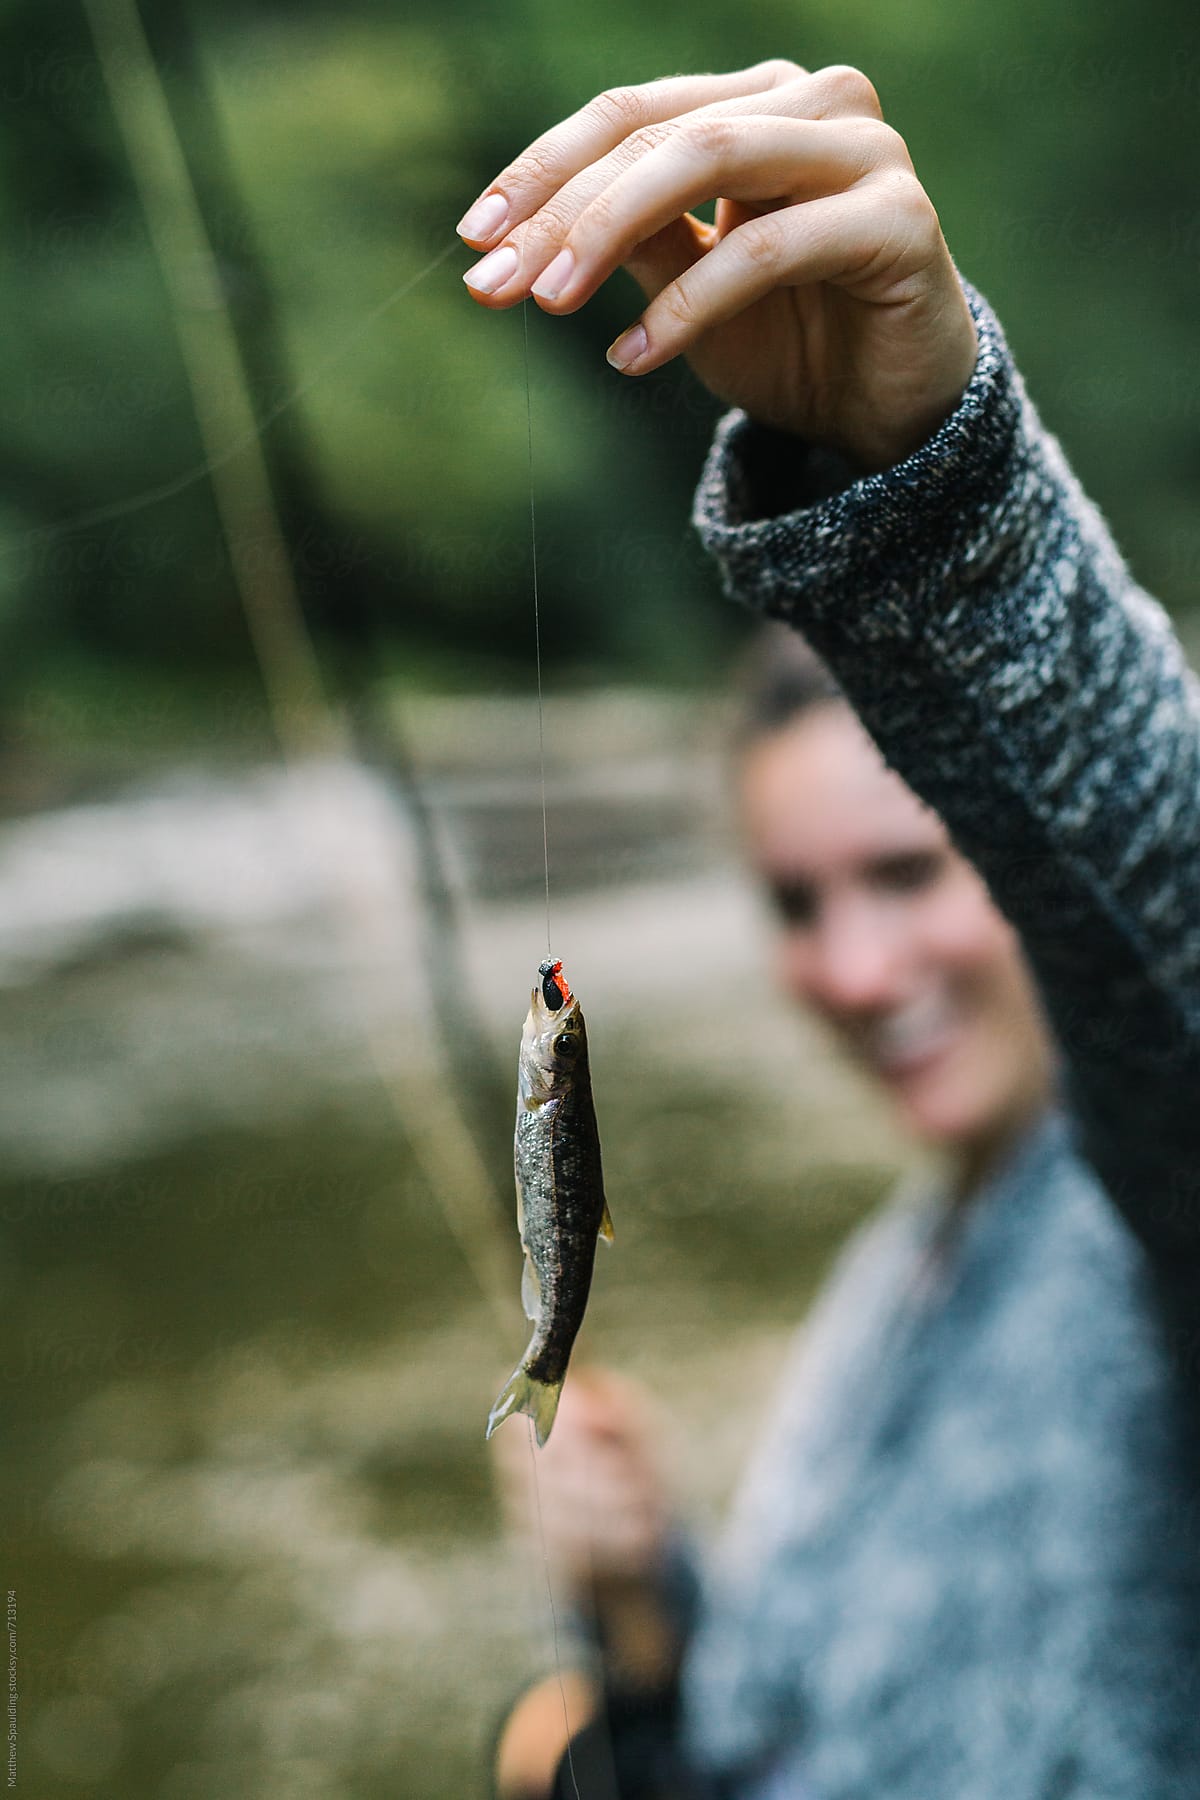 Woman Smiling With Very Small Fish Caught On Fly-fishing Line by Stocksy  Contributor Matthew Spaulding - Stocksy